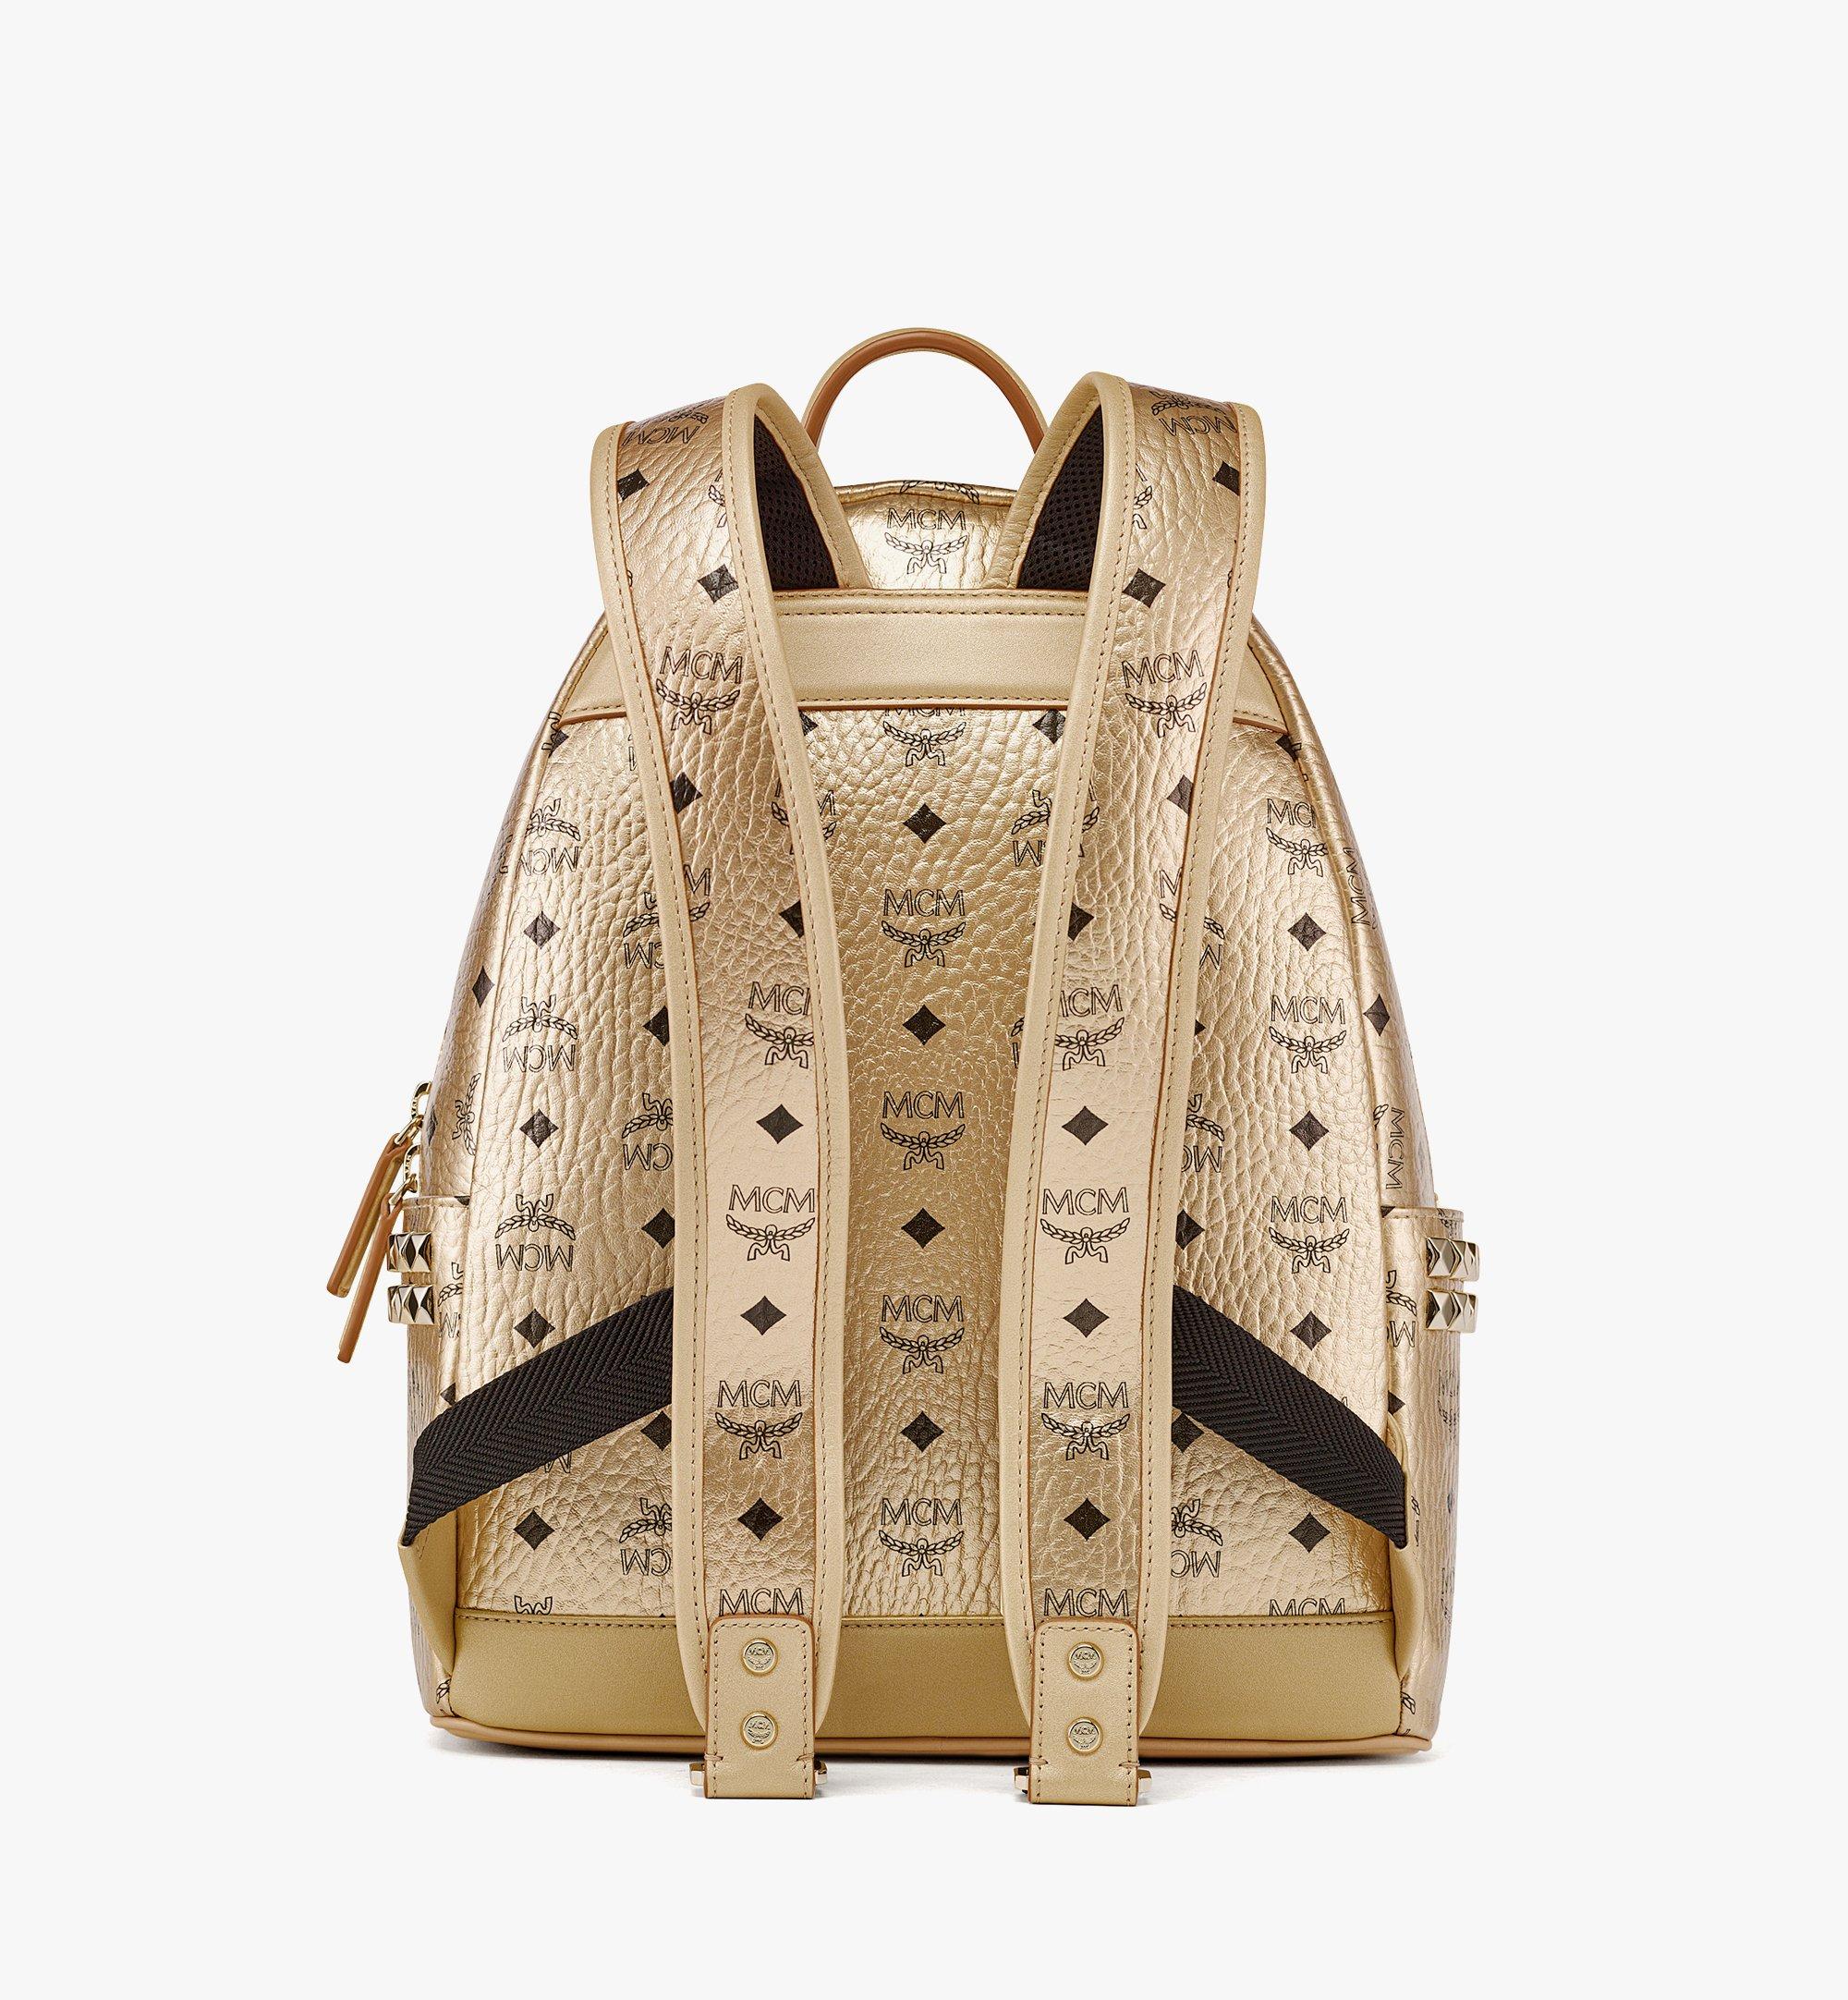 MCM Stark Side Studs Backpack in Visetos Gold MMKAAVE32T1001 Alternate View 3